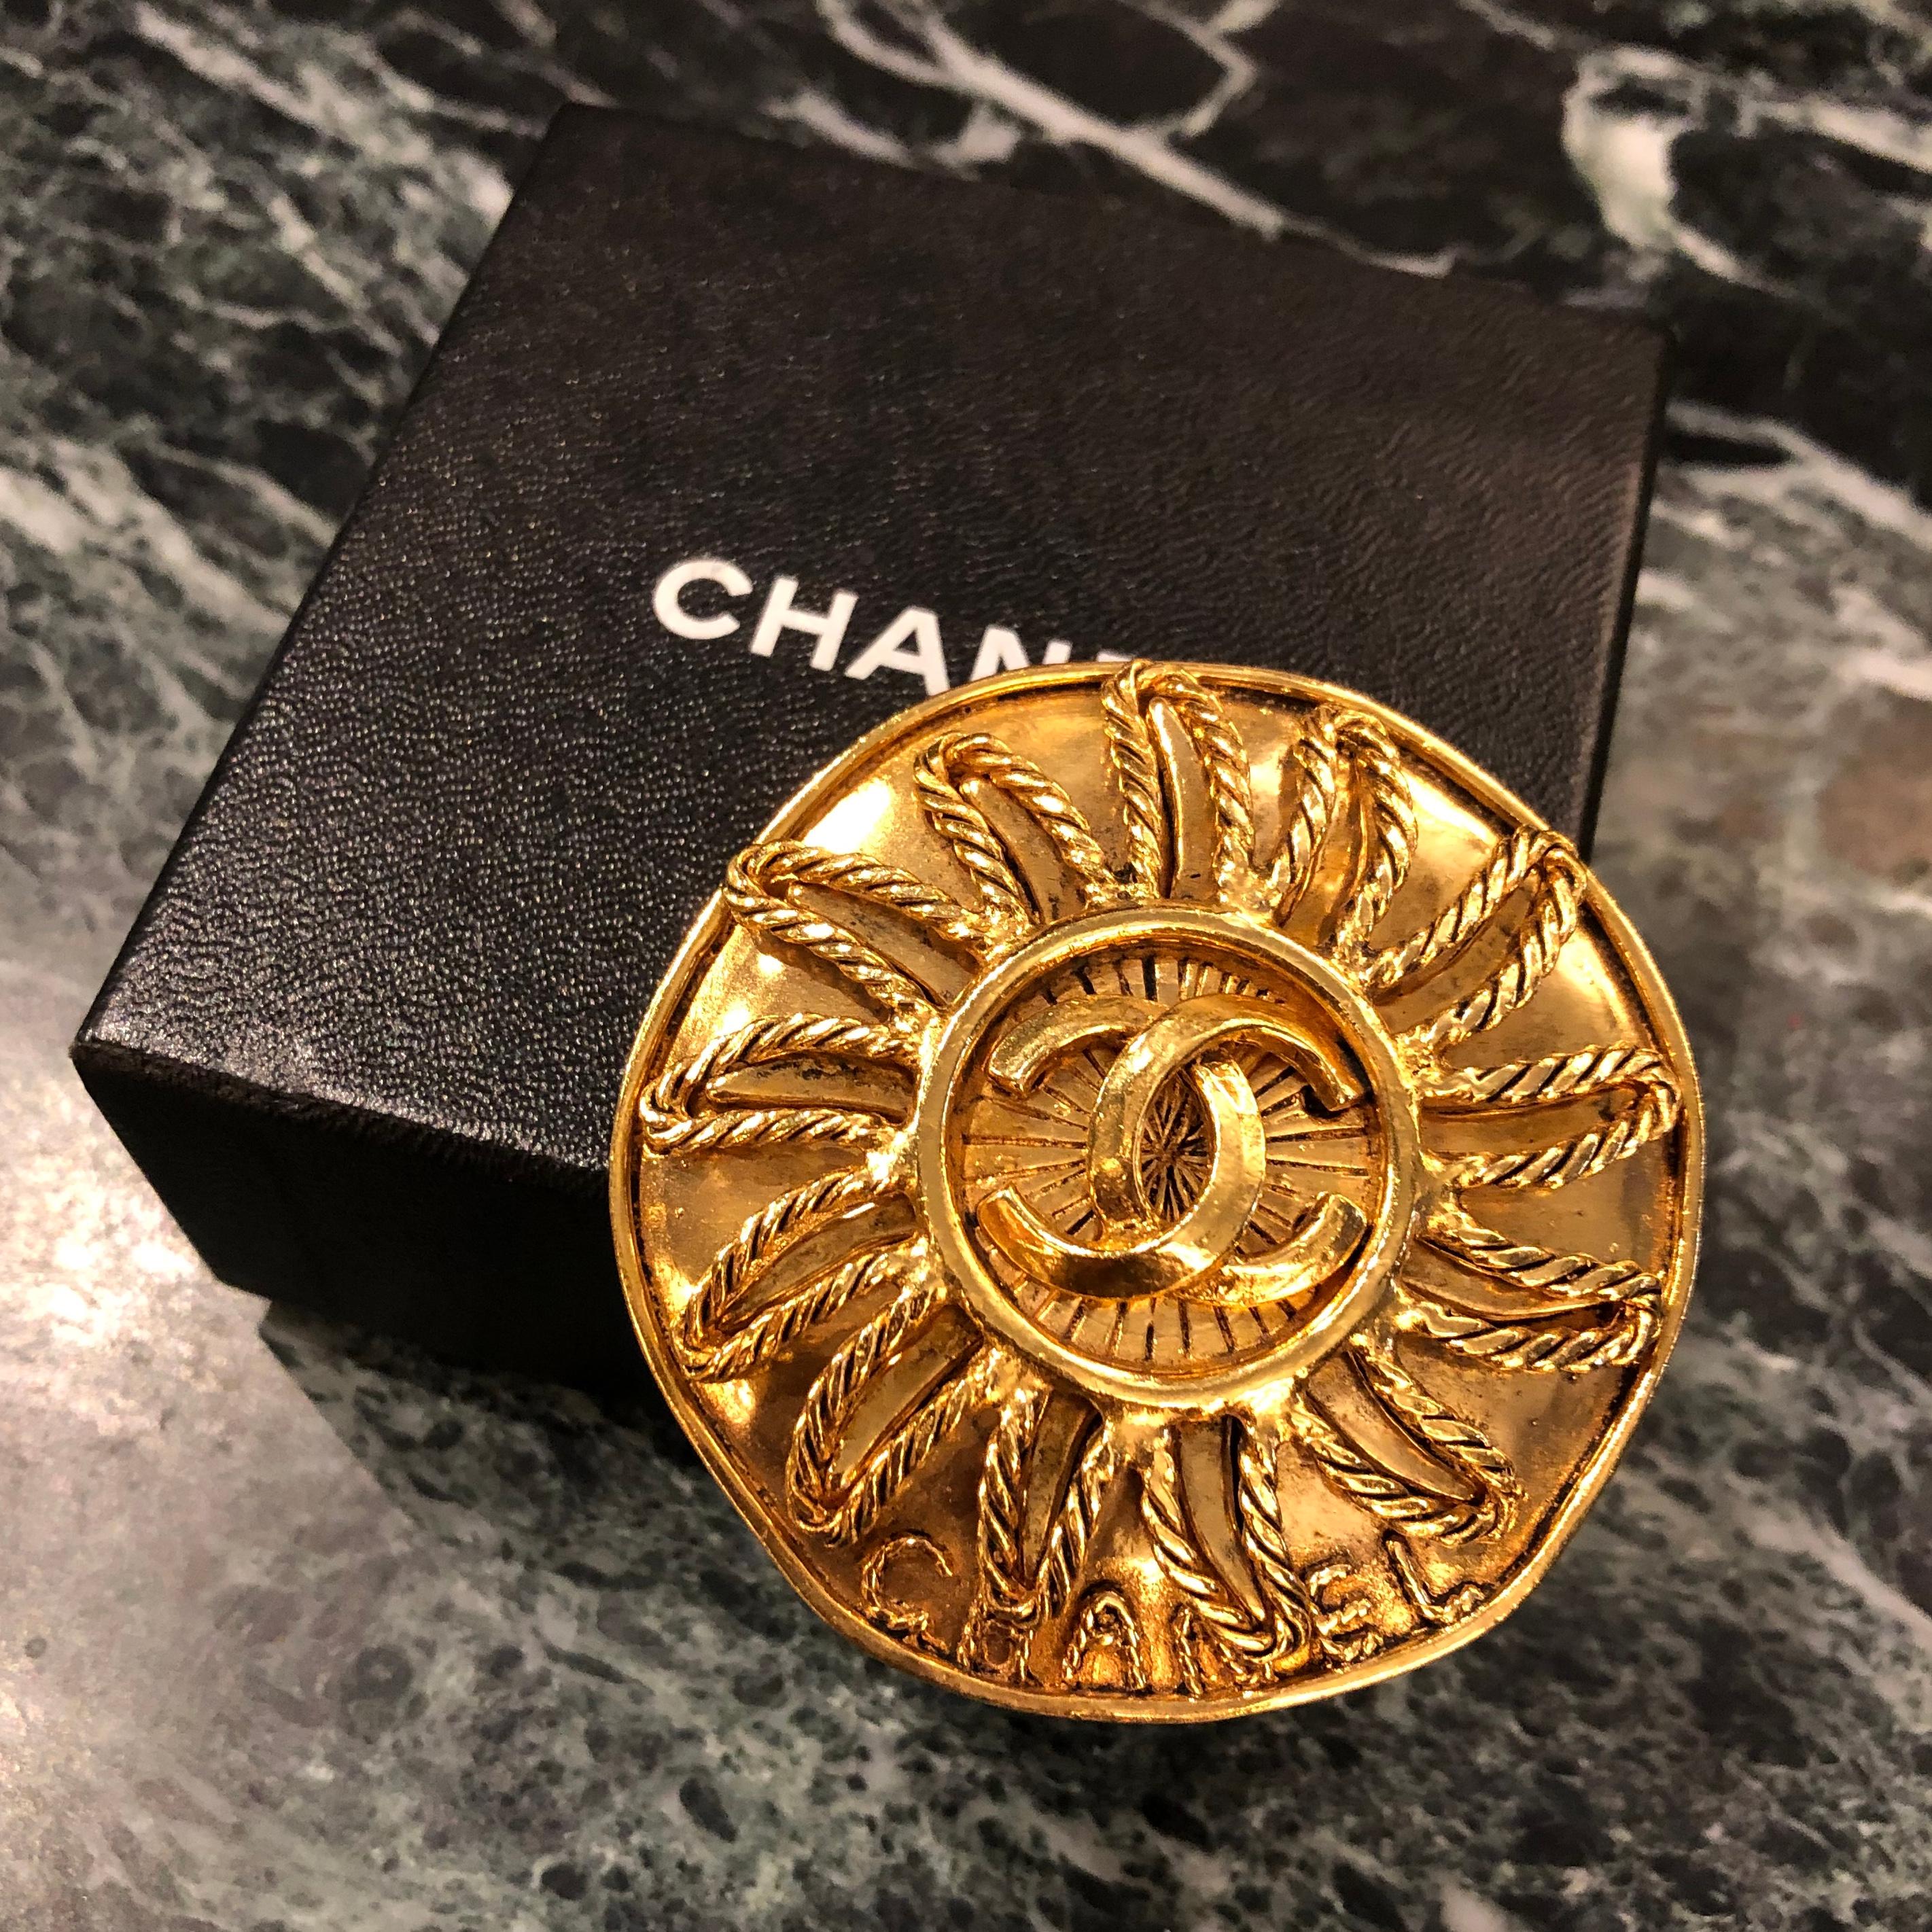 Contemporary Chanel gold sun brooch with double CC